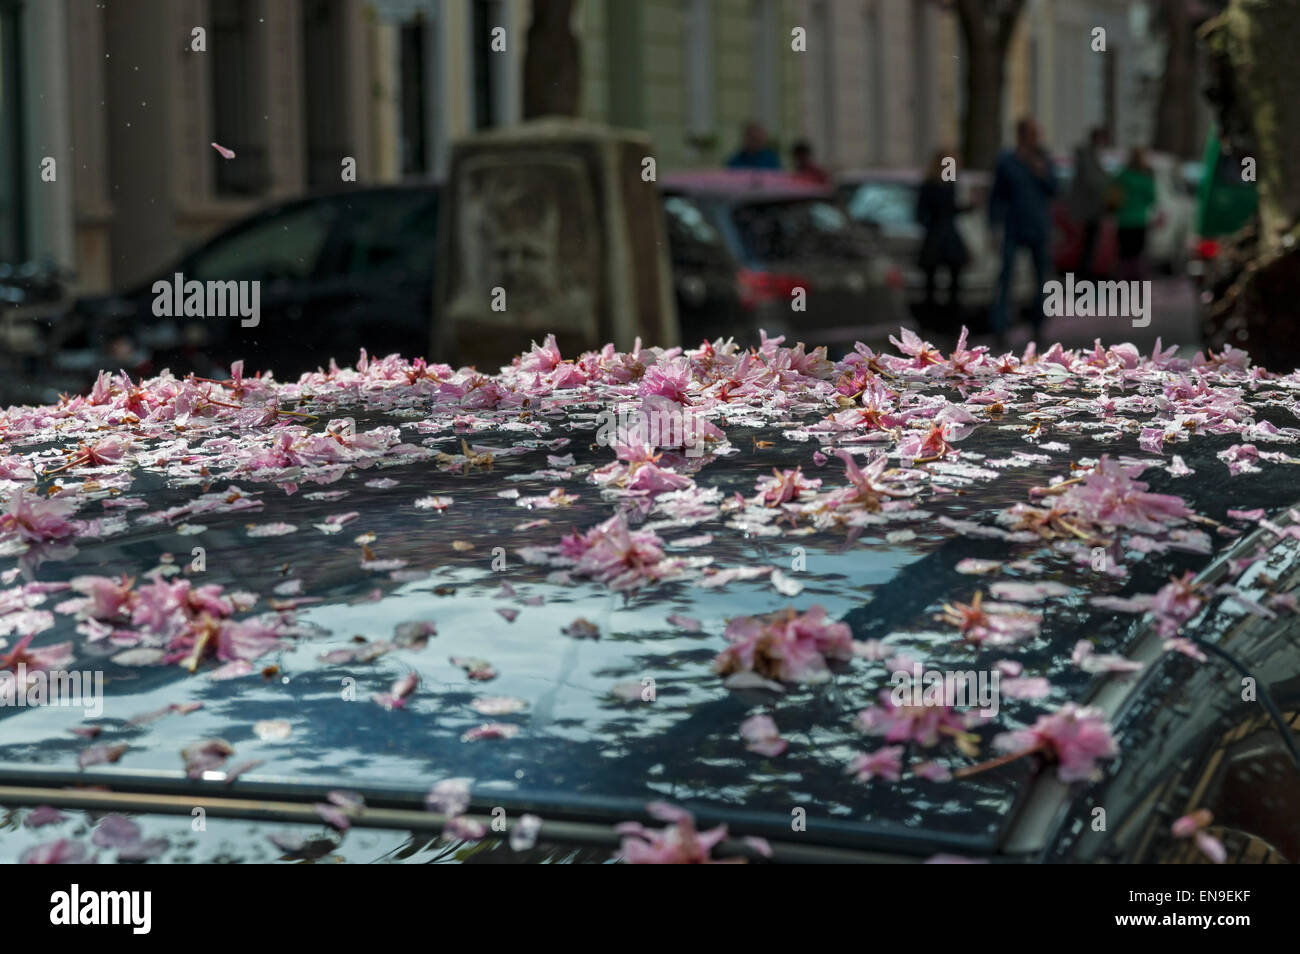 Cherry blossoms on a car roof, Bonn, Germany. Stock Photo